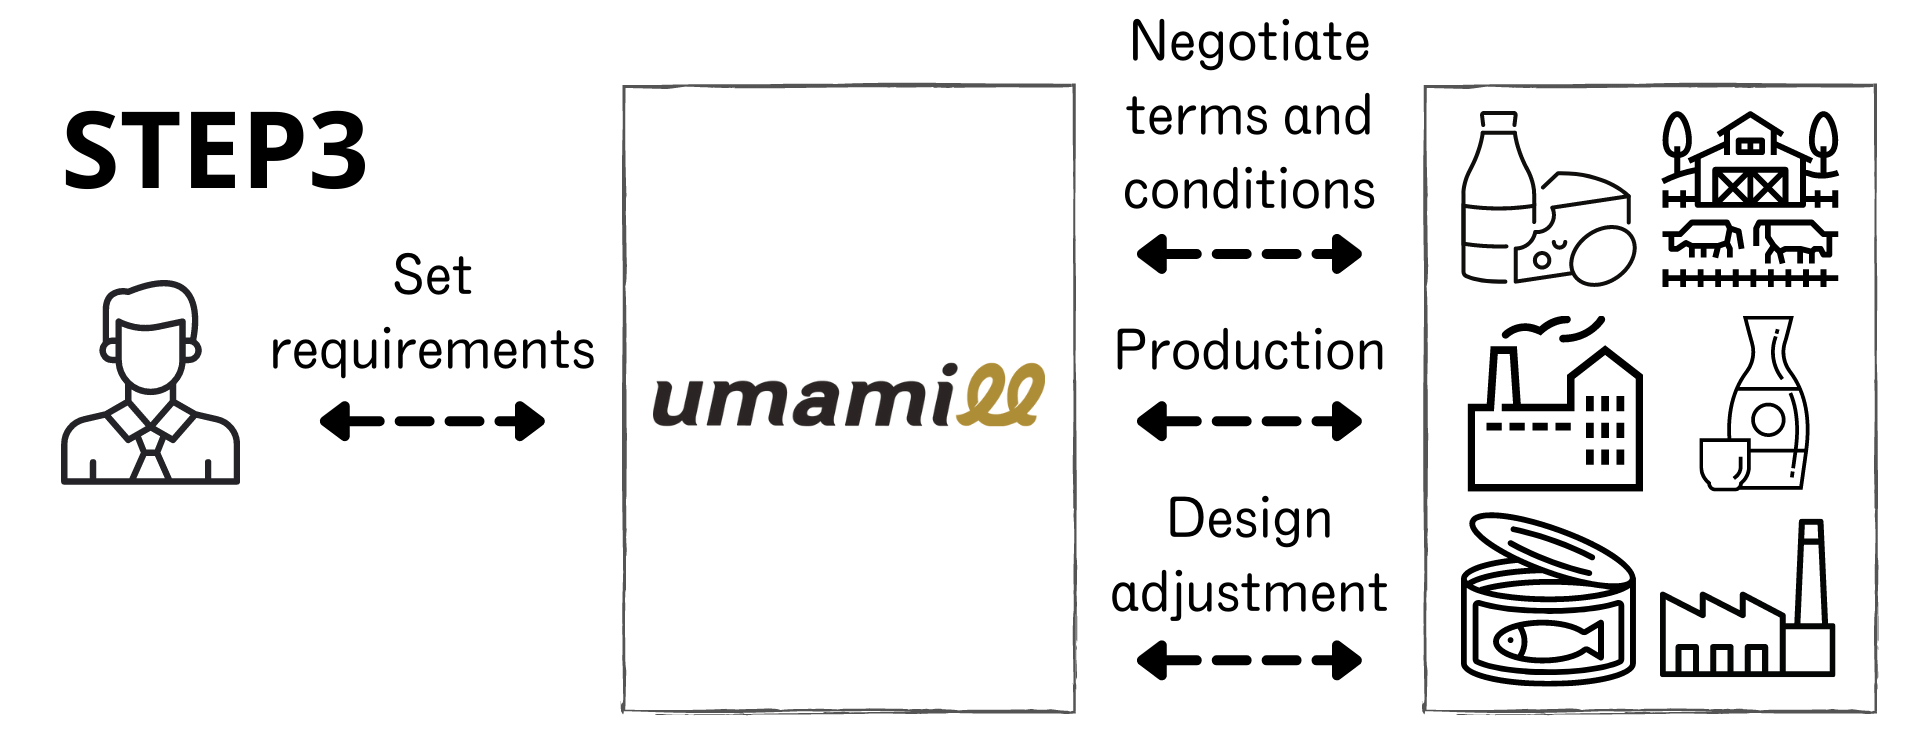 Set requirements > Negotiate terms and conditions & Production & Design adjustment